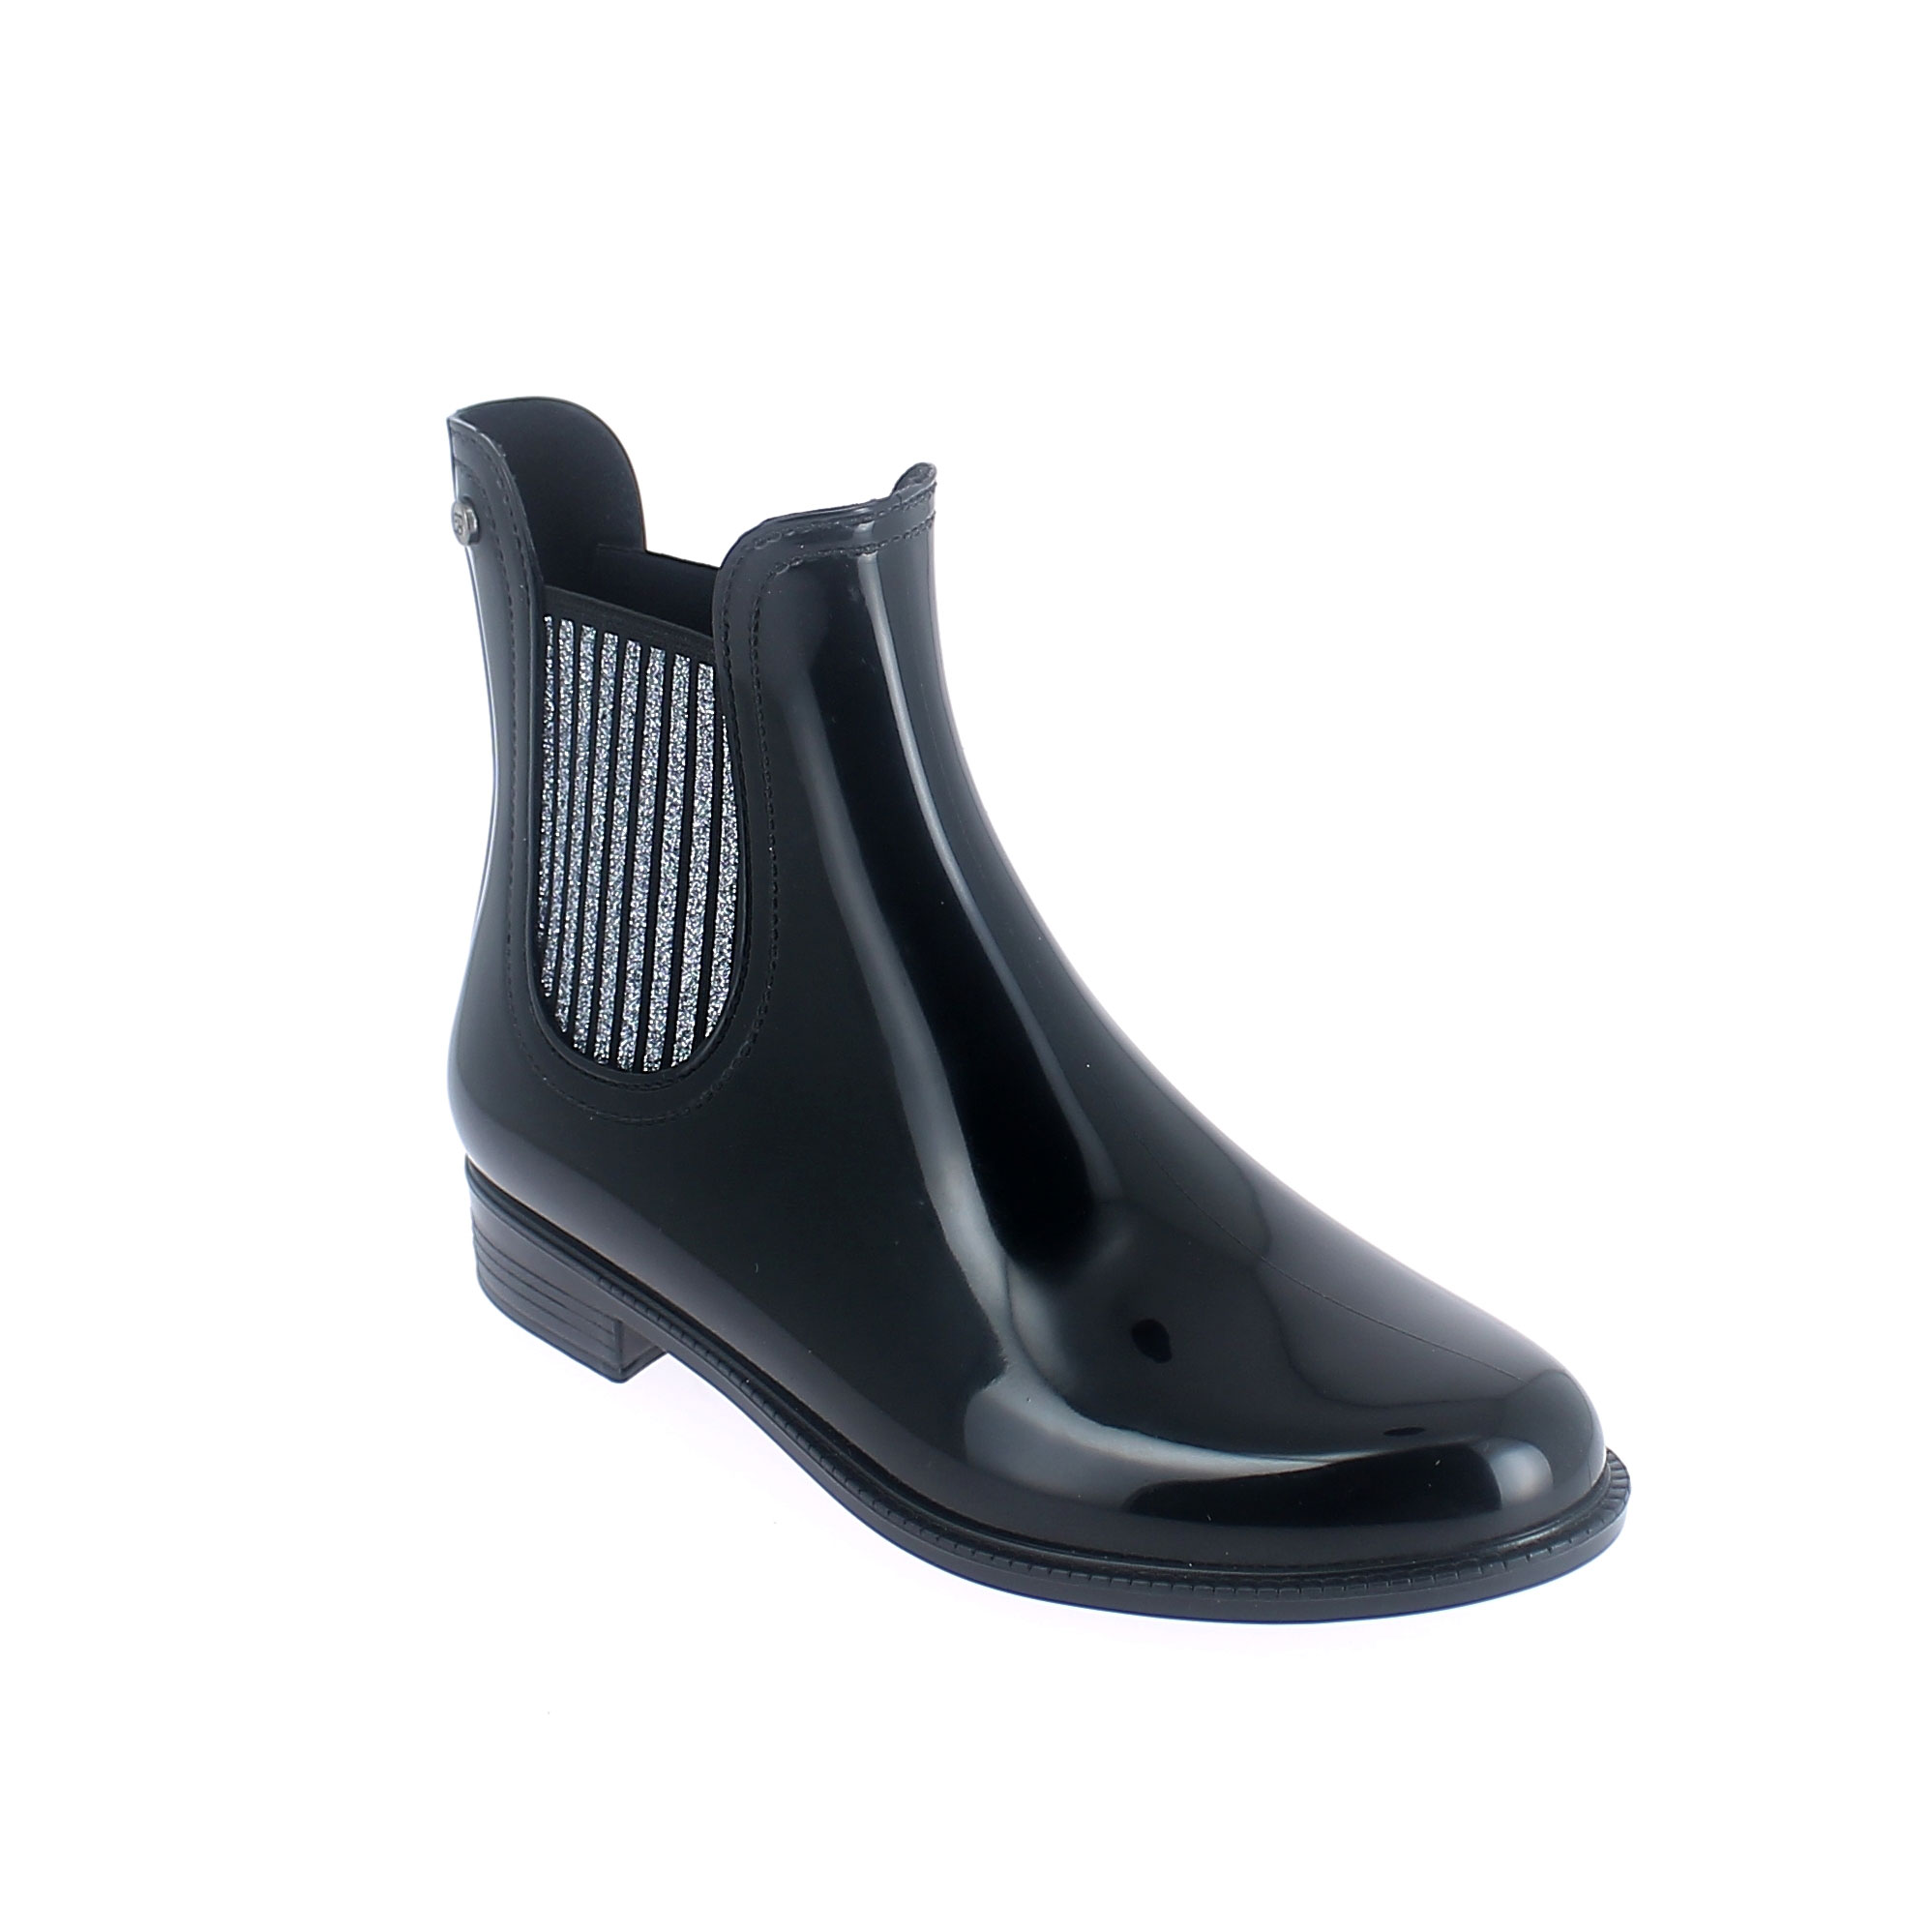 Chelsea boot in Black pvc with glittered elastics